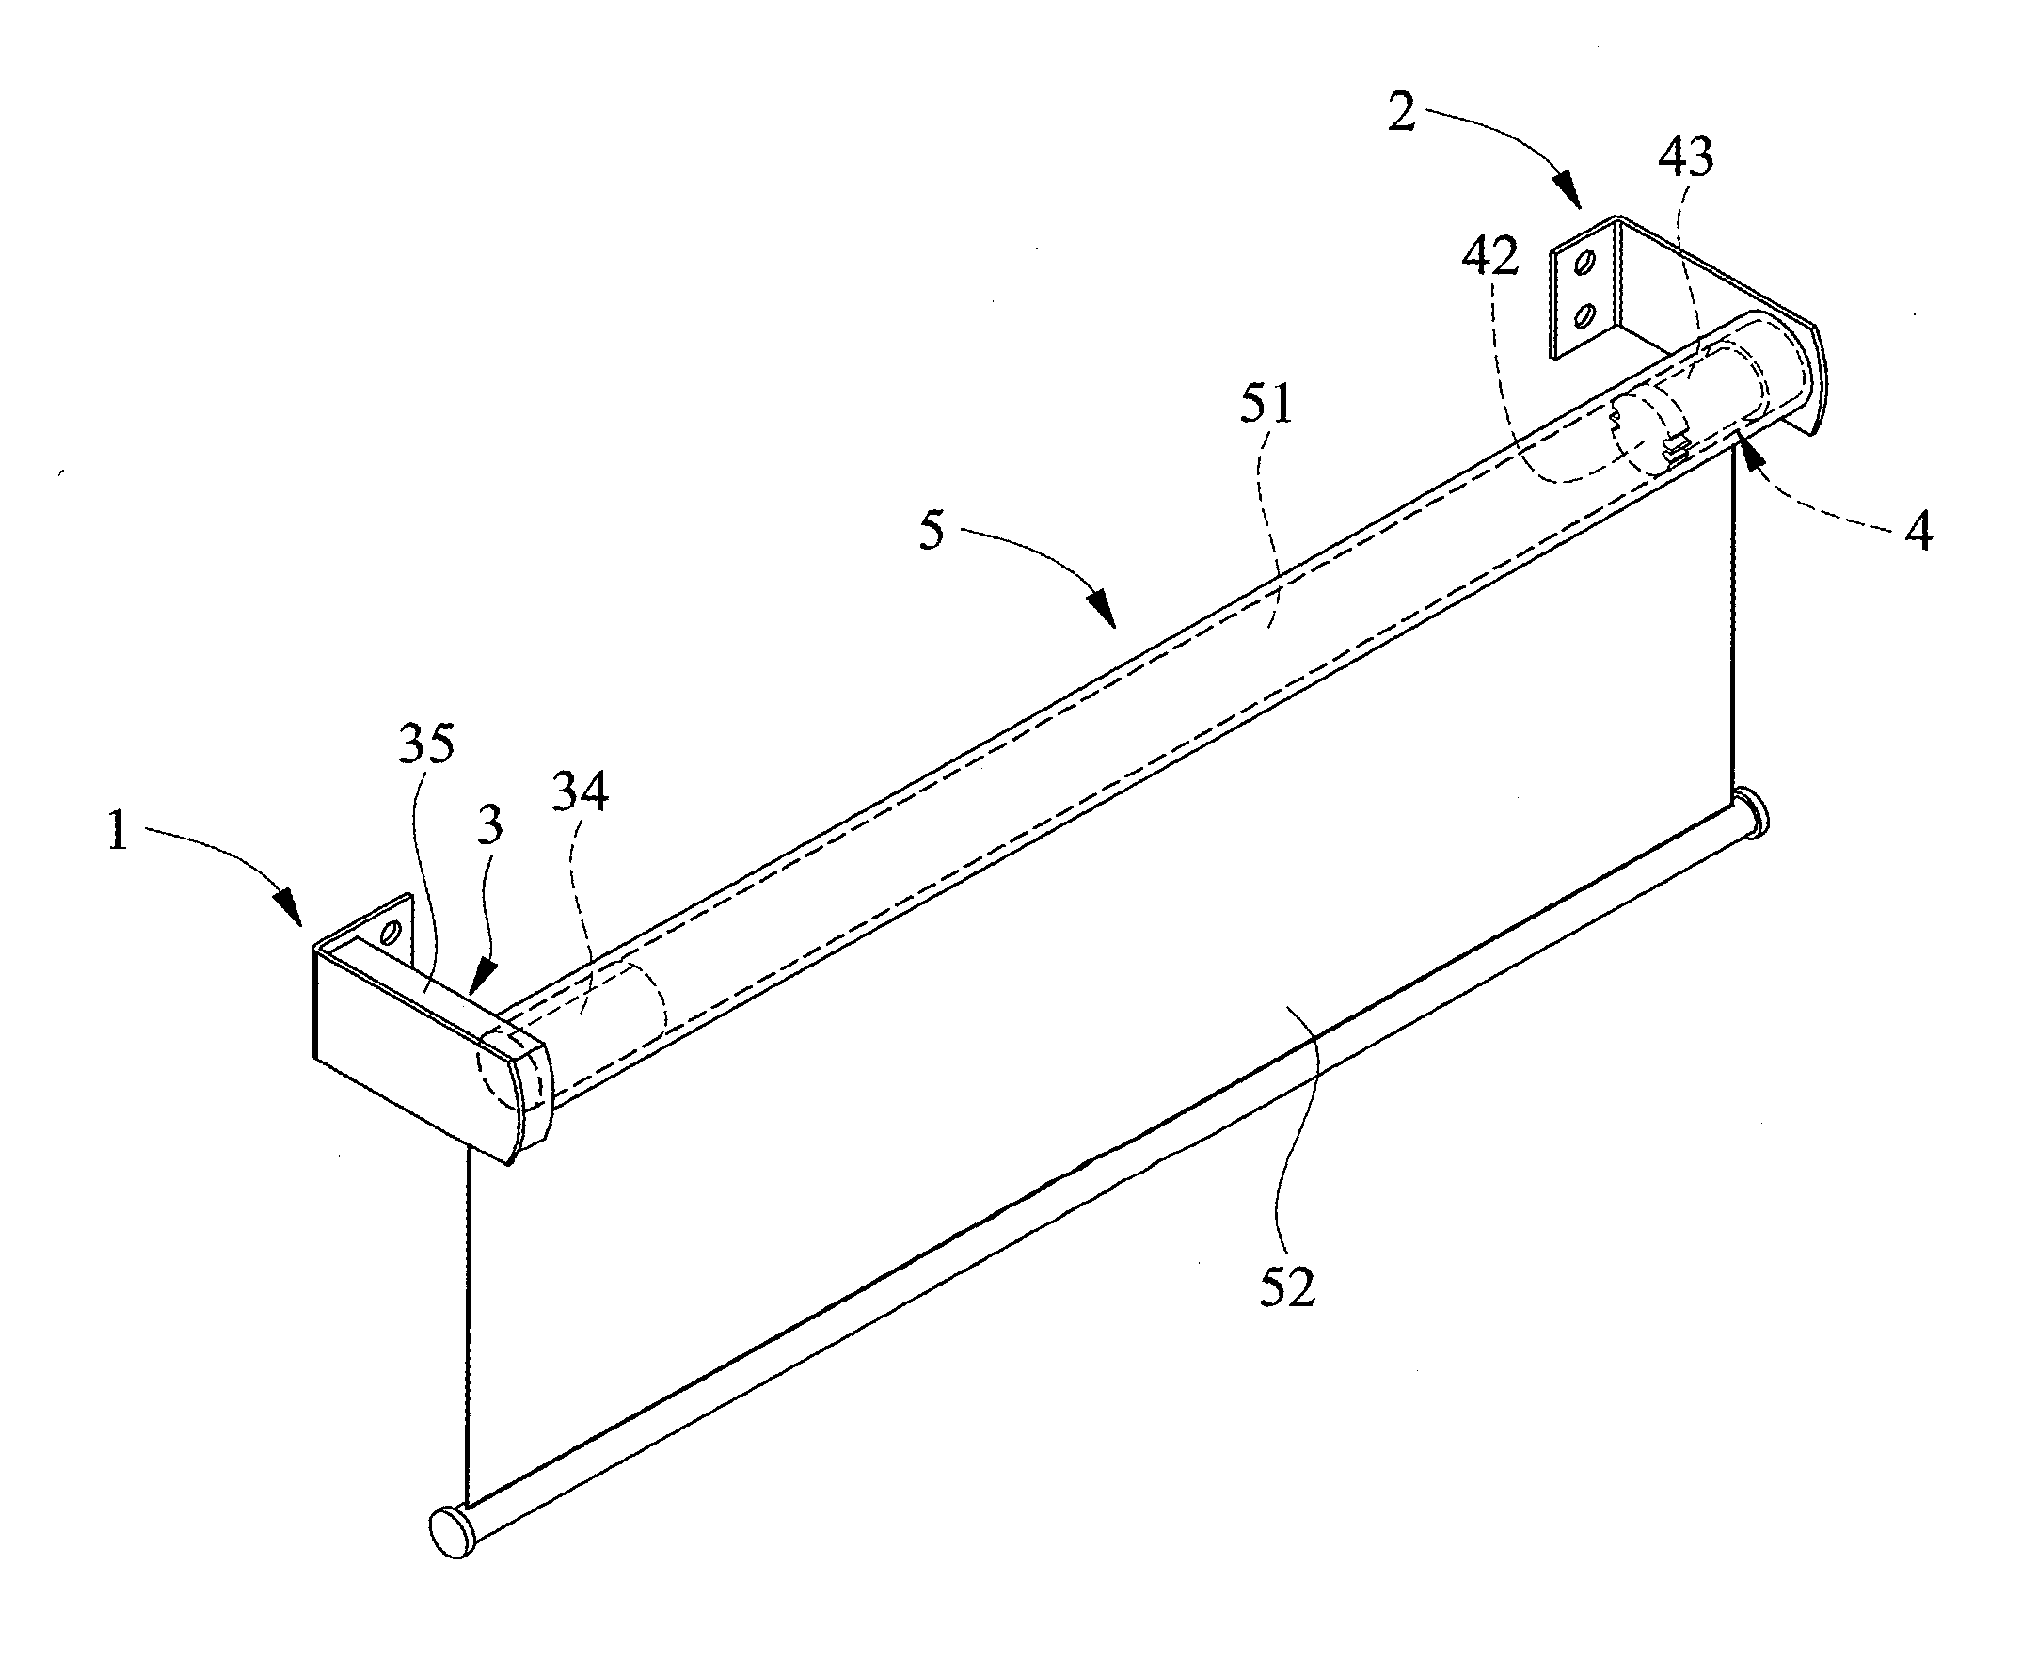 Automatic roller shade